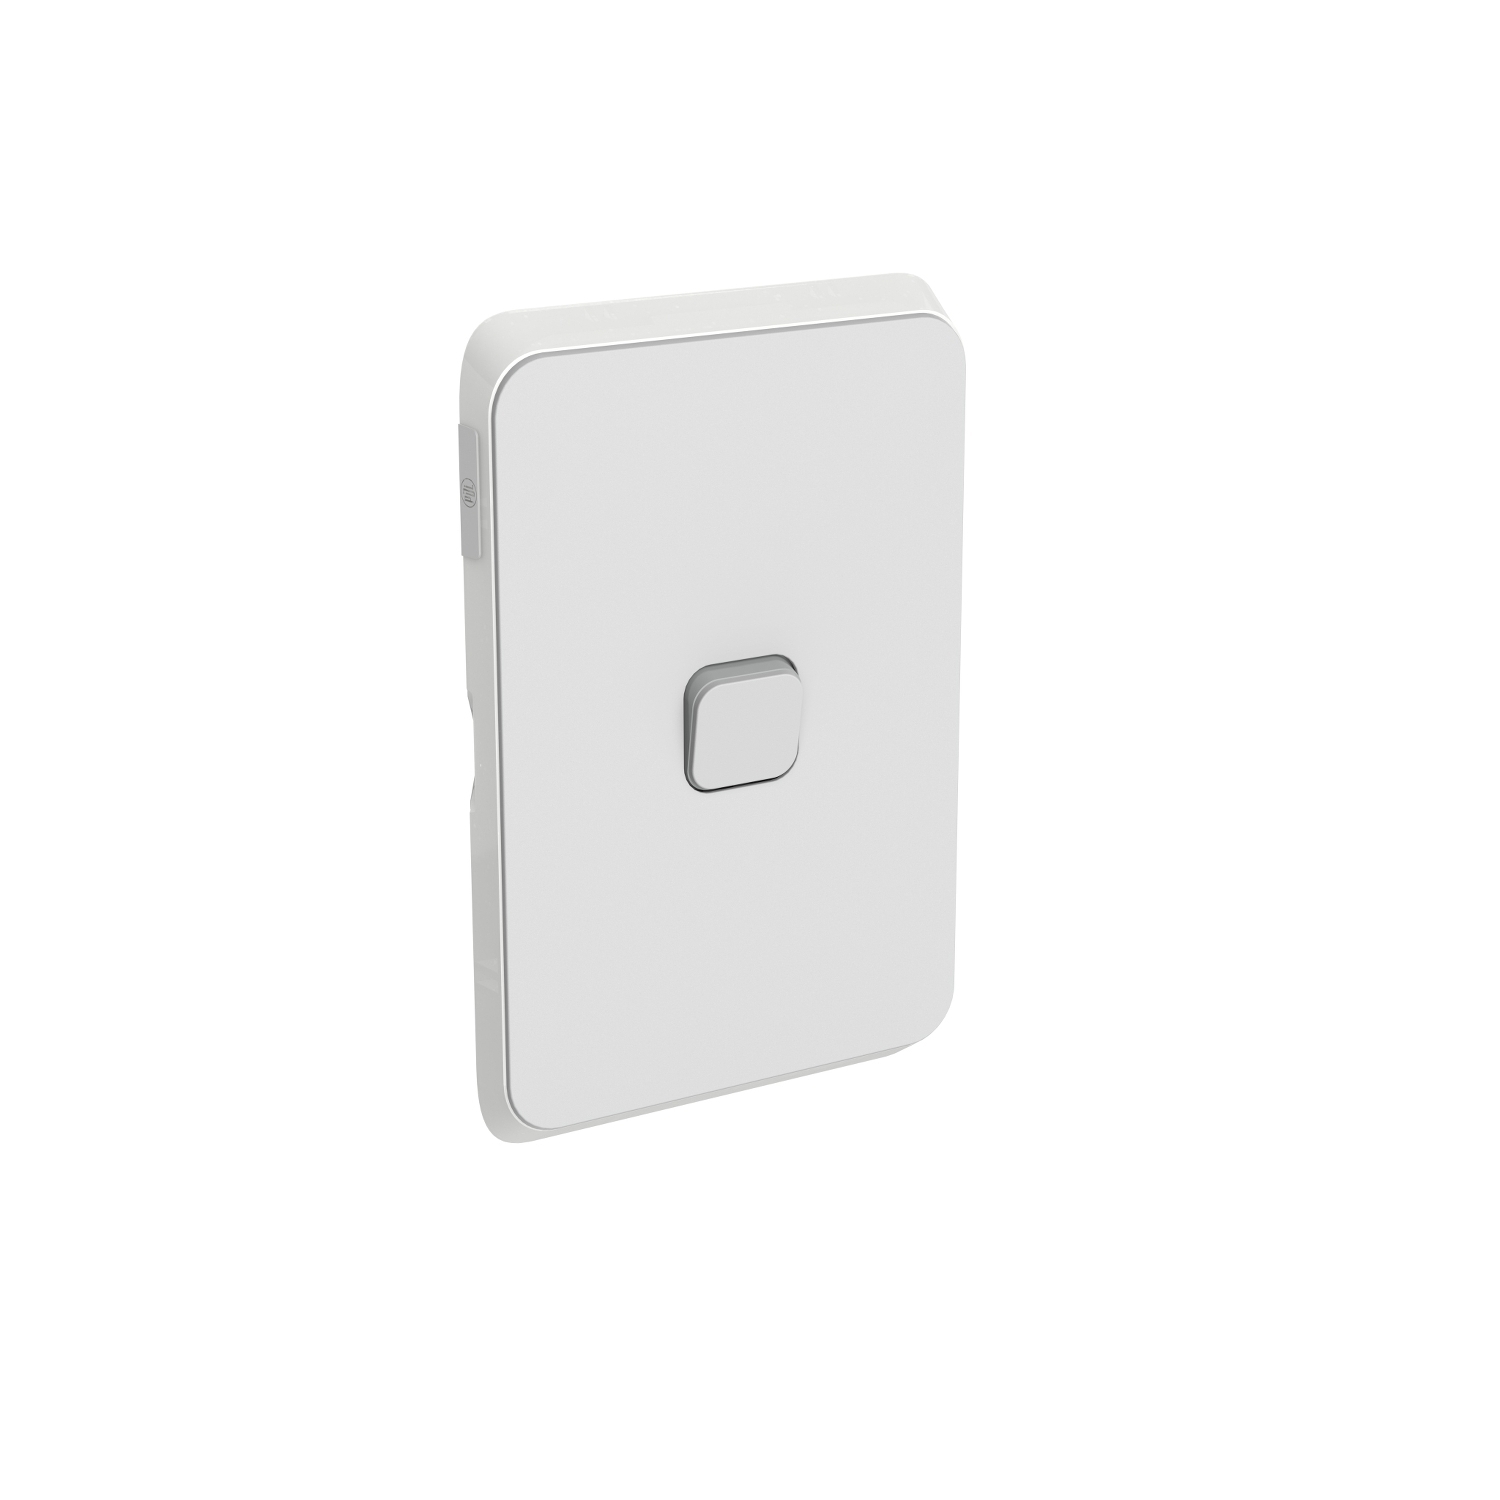 PDL381C-CY - PDL Iconic Cover Plate Switch 1Gang - Cool Grey